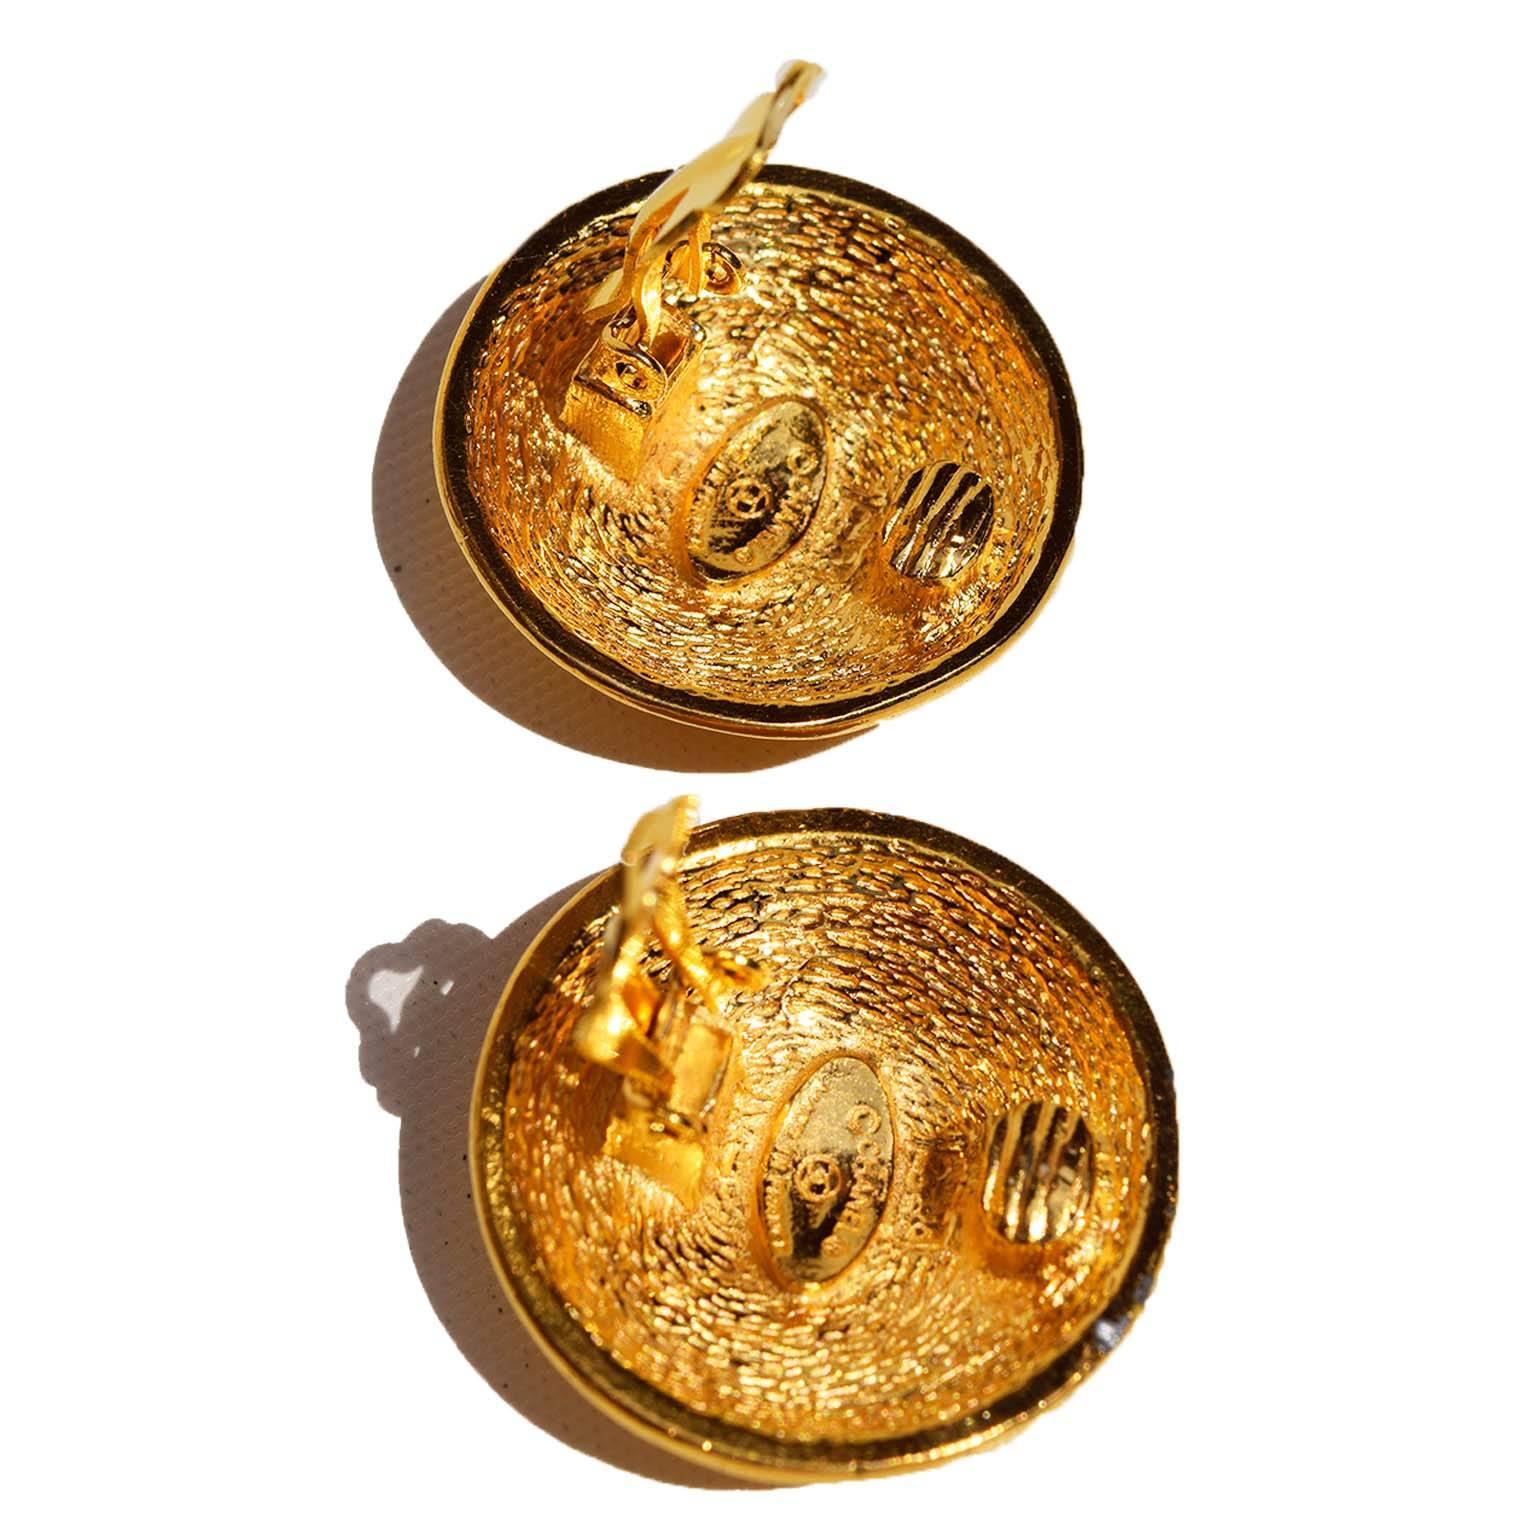 Chanel vintage quilted logo goldtone clip on earrings. Raised Chanel CC logo on quilt pattern base. Since the cartouche does not mention collection number or year, these earrings were manufactured  between 1984 - 1992.

Details:
Creator: